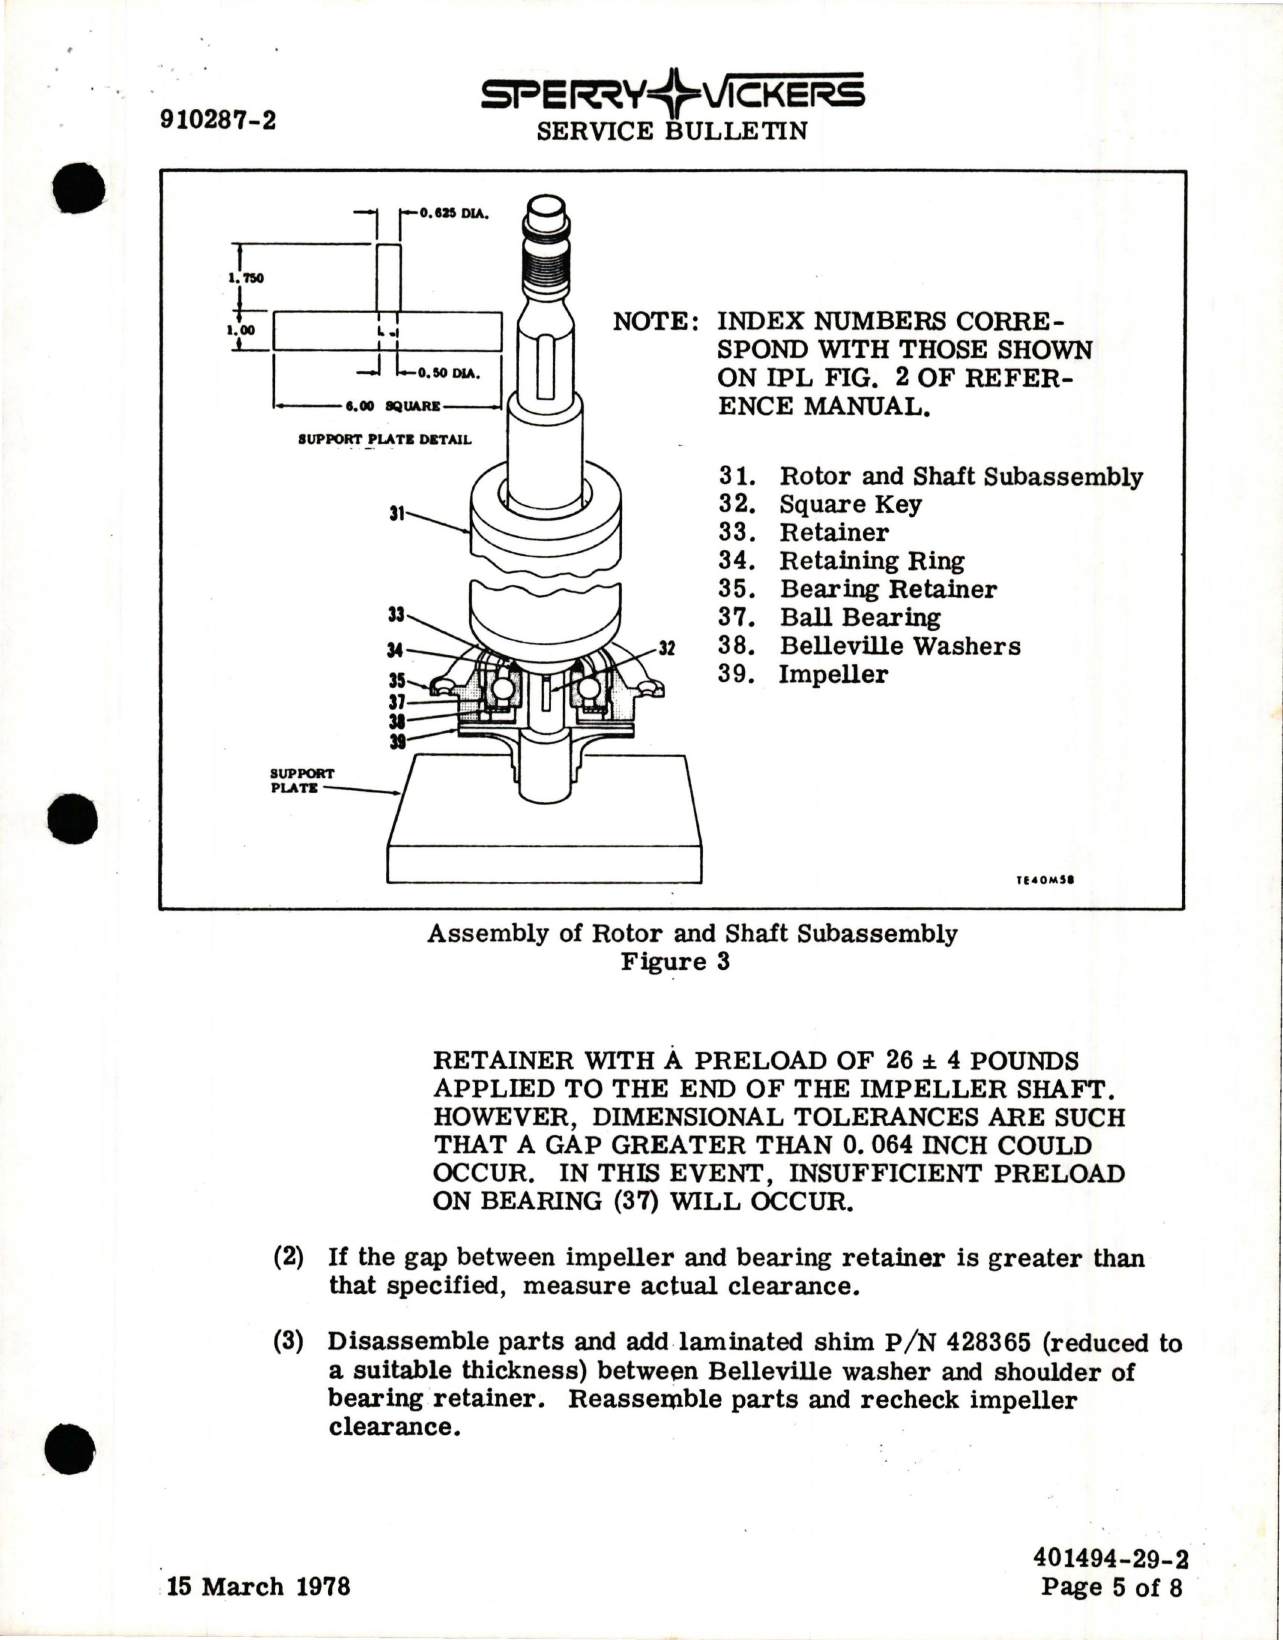 Sample page 5 from AirCorps Library document: Improvement Retention of Impeller for Hydraulic Motorpump